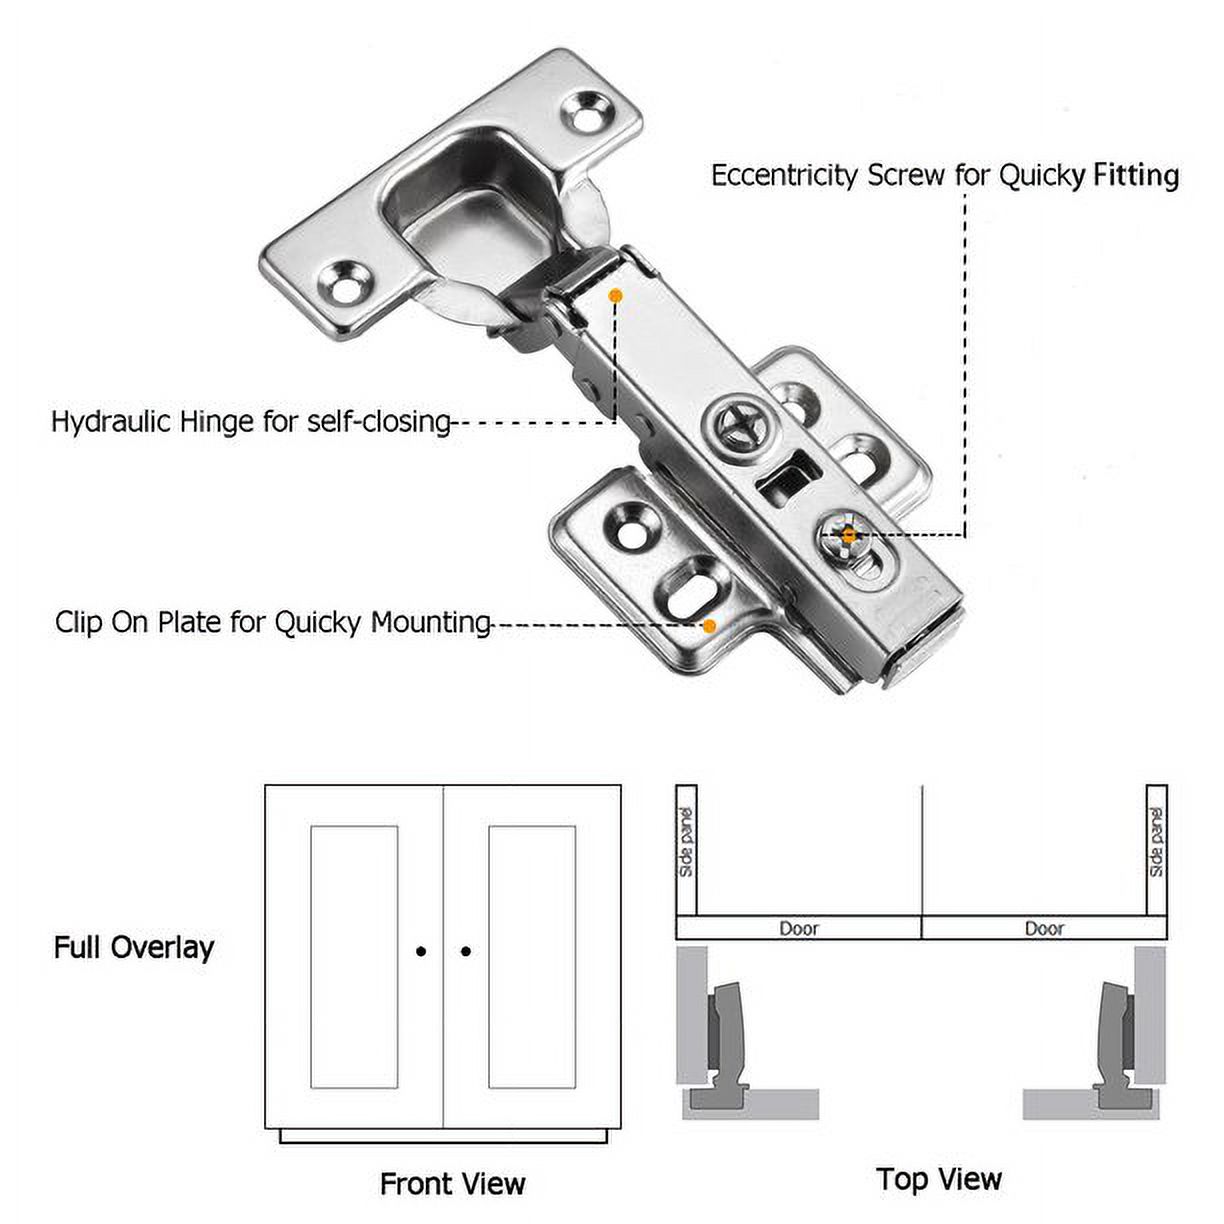 Luokim 40pcs Standard Cabinet Hinge,Fit for Frameless Cabinet,European Full Overlay,Soft Closing,Four-Hole mounting Plate Hinges,Nickel Plated Finish - image 5 of 7